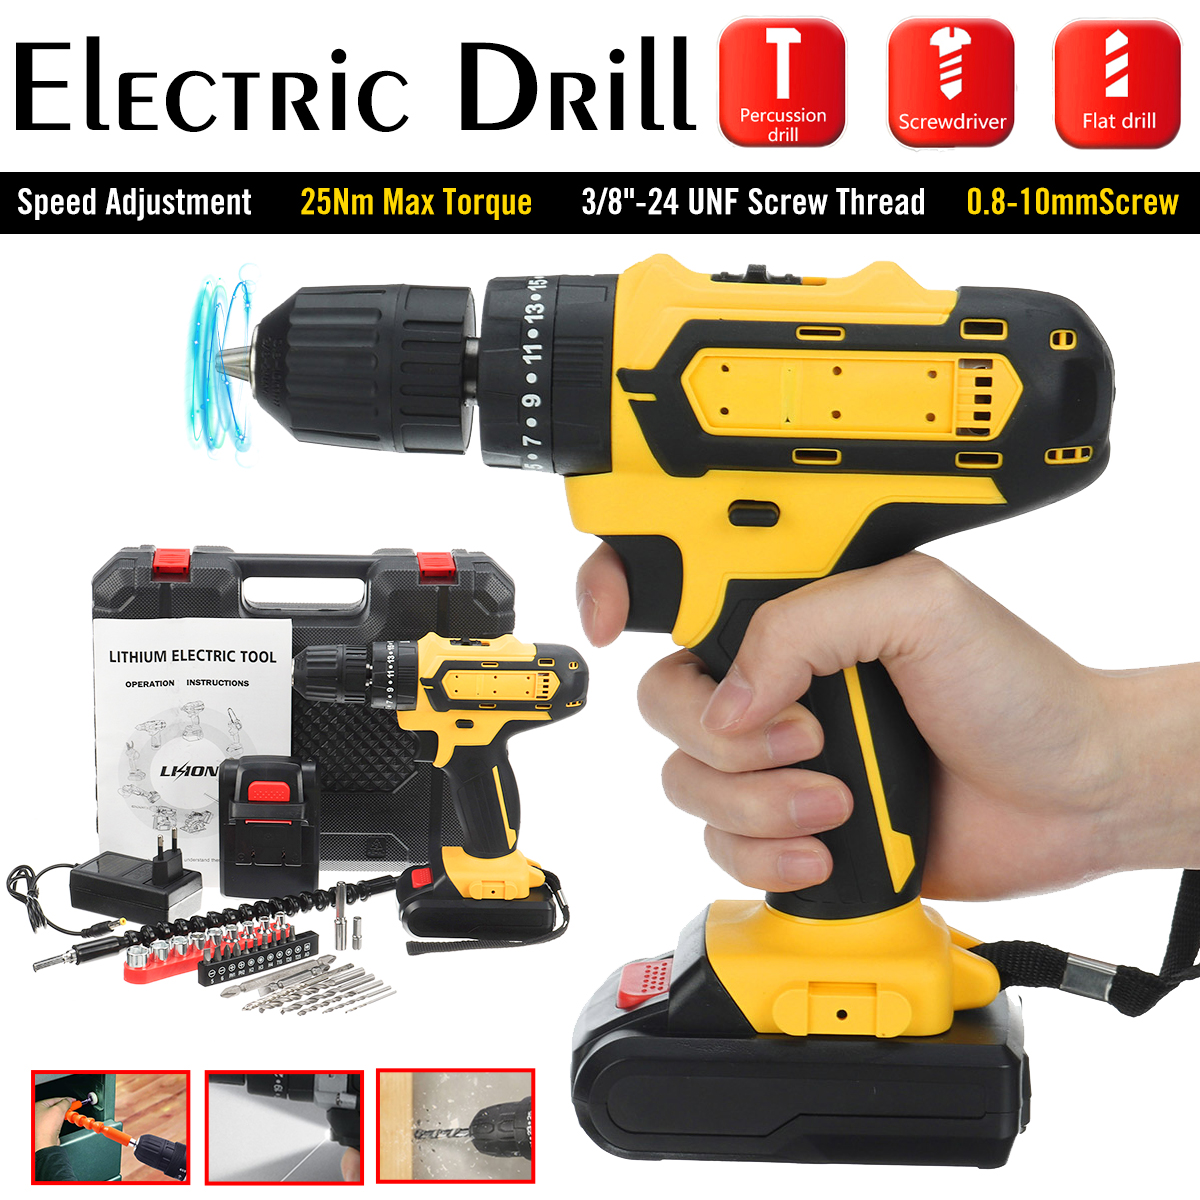 Cordless-Rechargeable-Electric-Drill-Screwdriver-LED-Portable-Metal-Wood-Drilling-Tool-W-12pcs-Batte-1848720-2